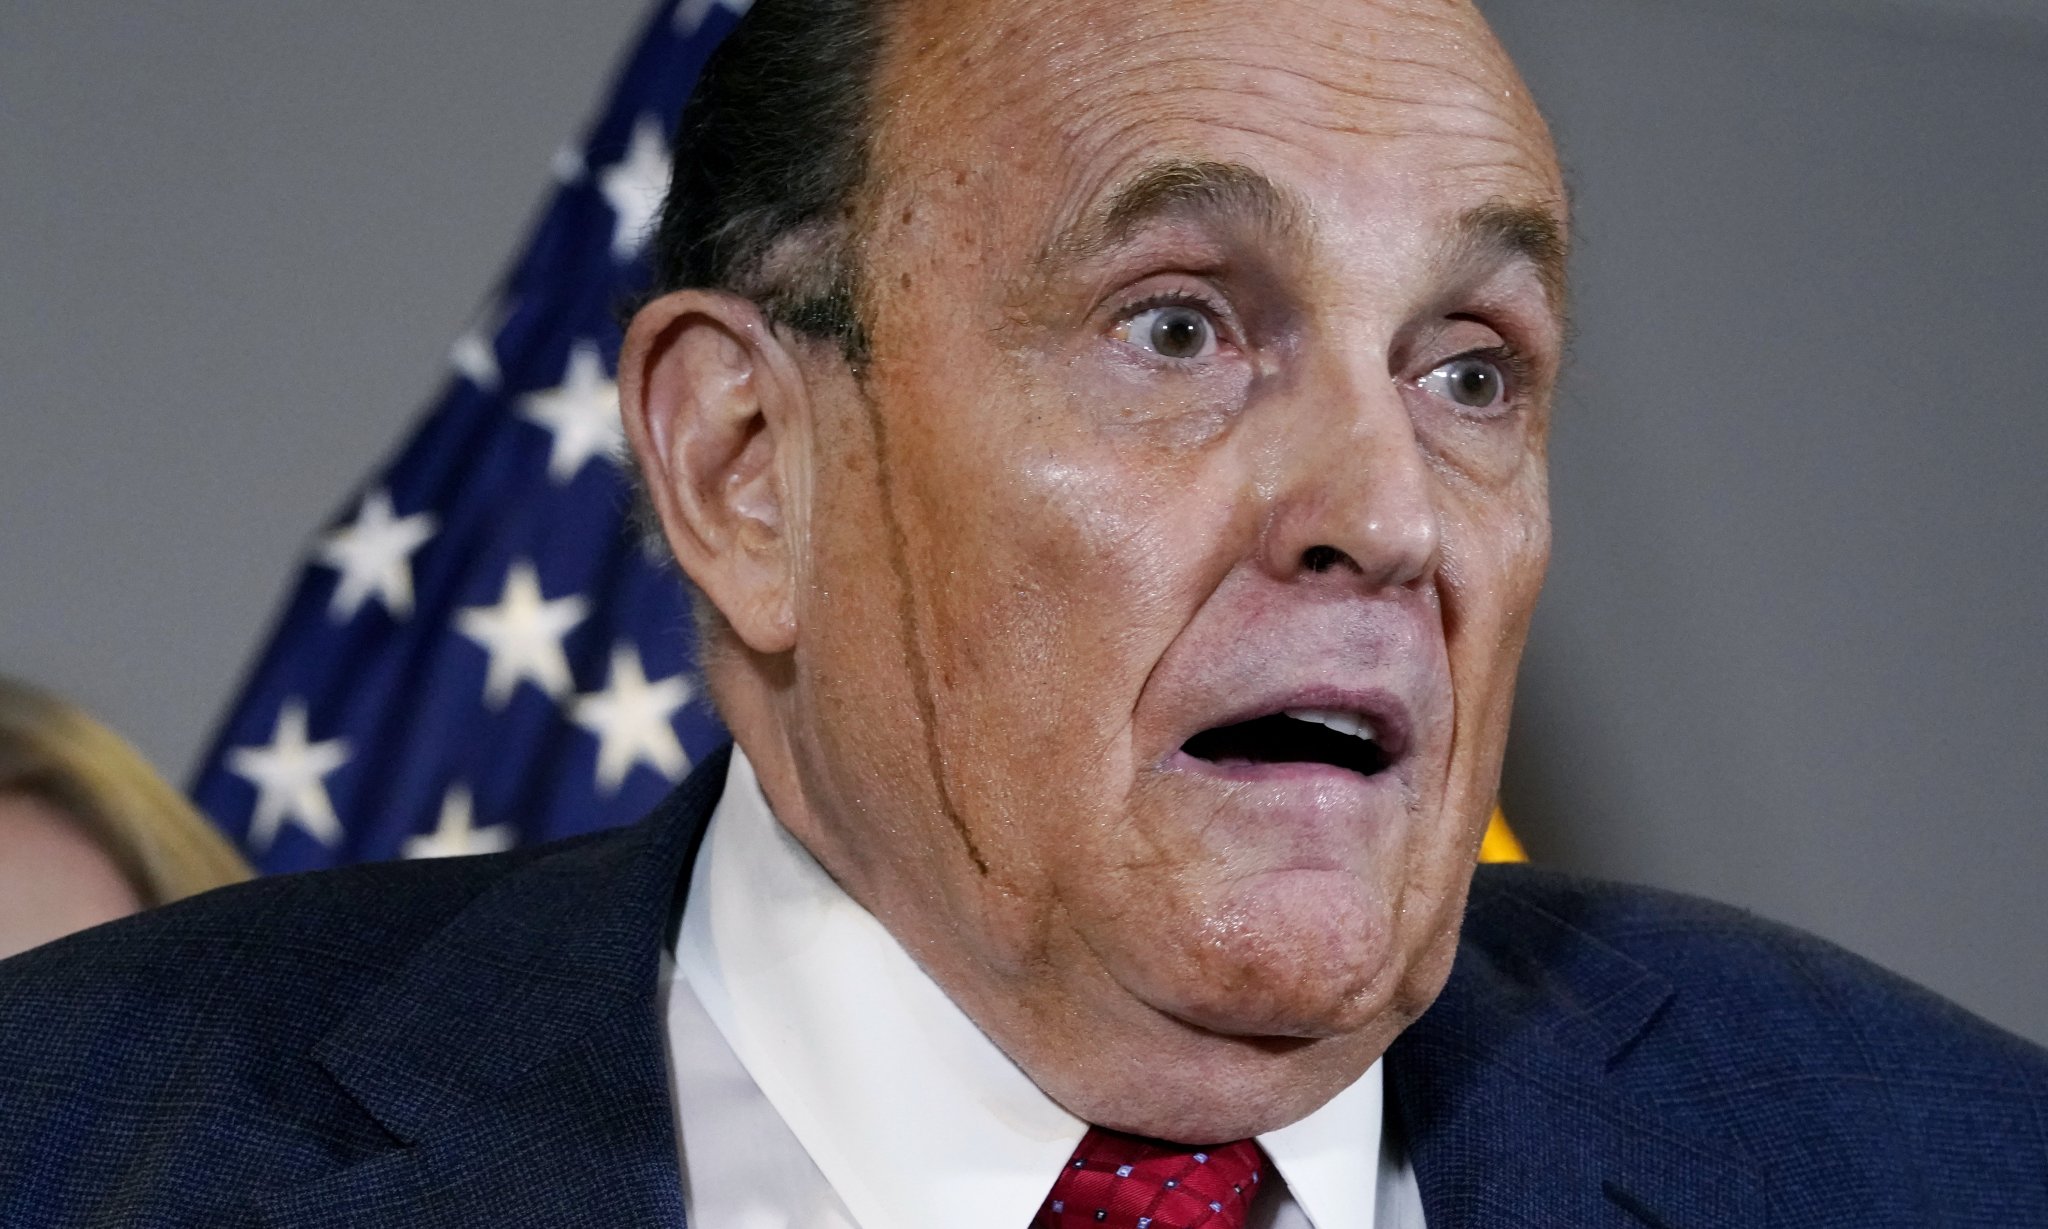 The fall of Rudy Giuliani, once the toast of New York, continues unabated